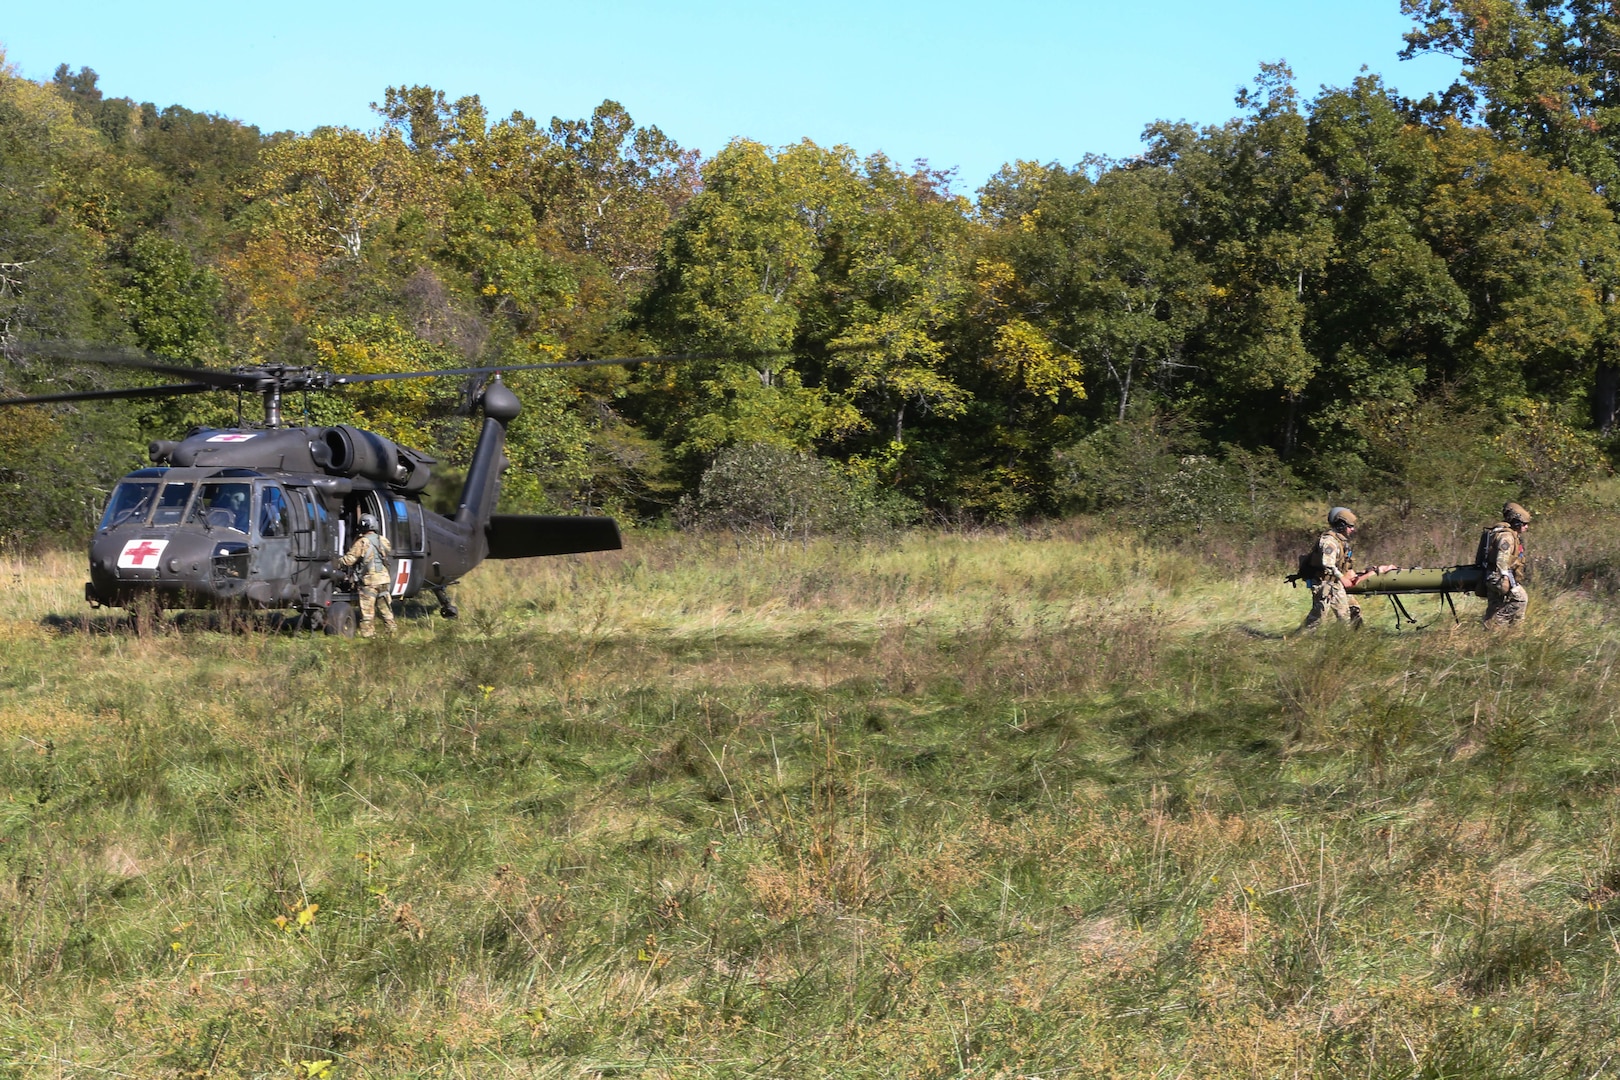 Joint training exercise with Det. 2, Co. G, 3/238th Aviation MEDEVAC, Cox Health and Missouri State Highway Patrol at Hercules Glade Wilderness, Bradleyville, Mo., Oct. 06, 2022. Multiple Missouri departments teamed up to practice life-saving MEDEVAC scenarios. (Photo by U.S. Army National Guard Spc. Rose Di Trolio.)